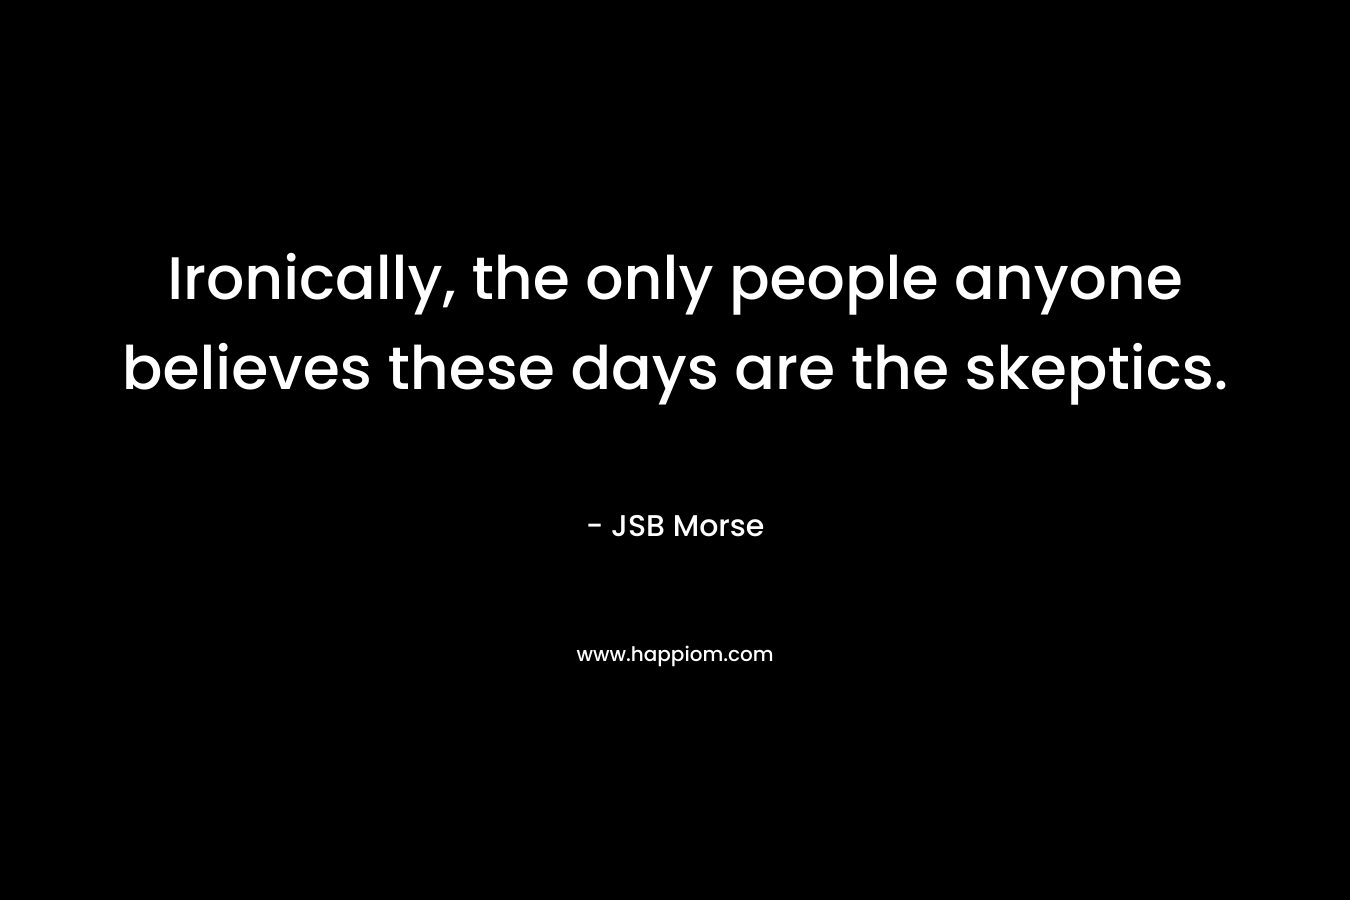 Ironically, the only people anyone believes these days are the skeptics. – JSB Morse